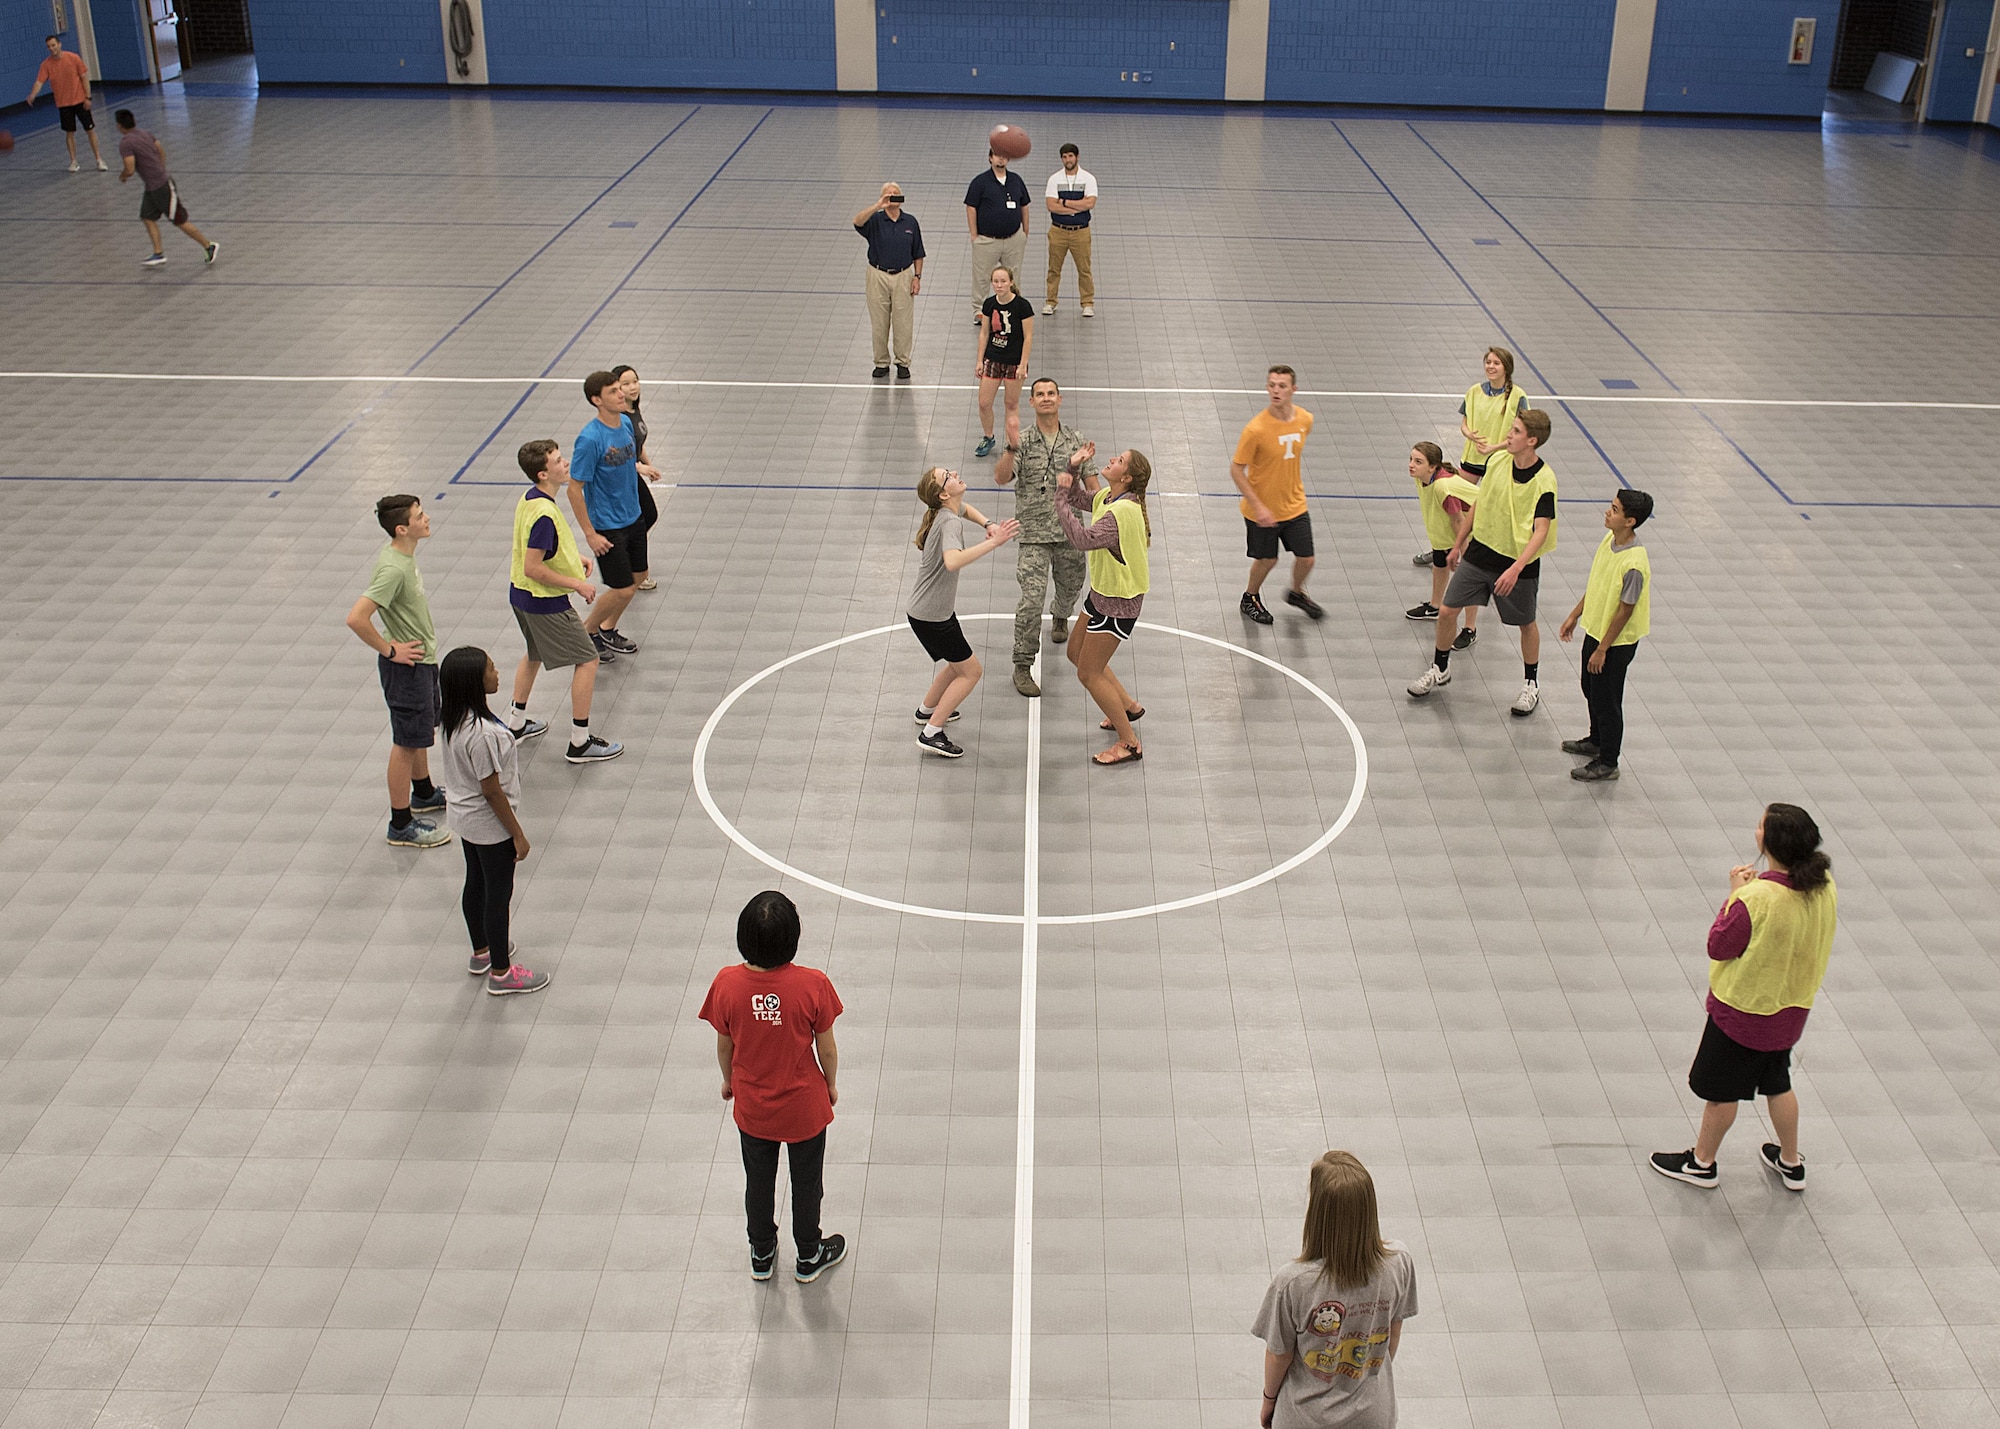 Students with Youth Leadership Blount play flicker ball in the Wilson Hall activities building at the Air National Guard’s I.G. Brown Training and Education Center April 18, 2017, as part of their leadership day. The students also met the commander, took a 4 Lenses assessment, and toured the TEC TV studios before leaving McGhee Tyson Air National Guard Base for other area events. (U.S. Air National Guard photo by Master Sgt. Mike R. Smith)